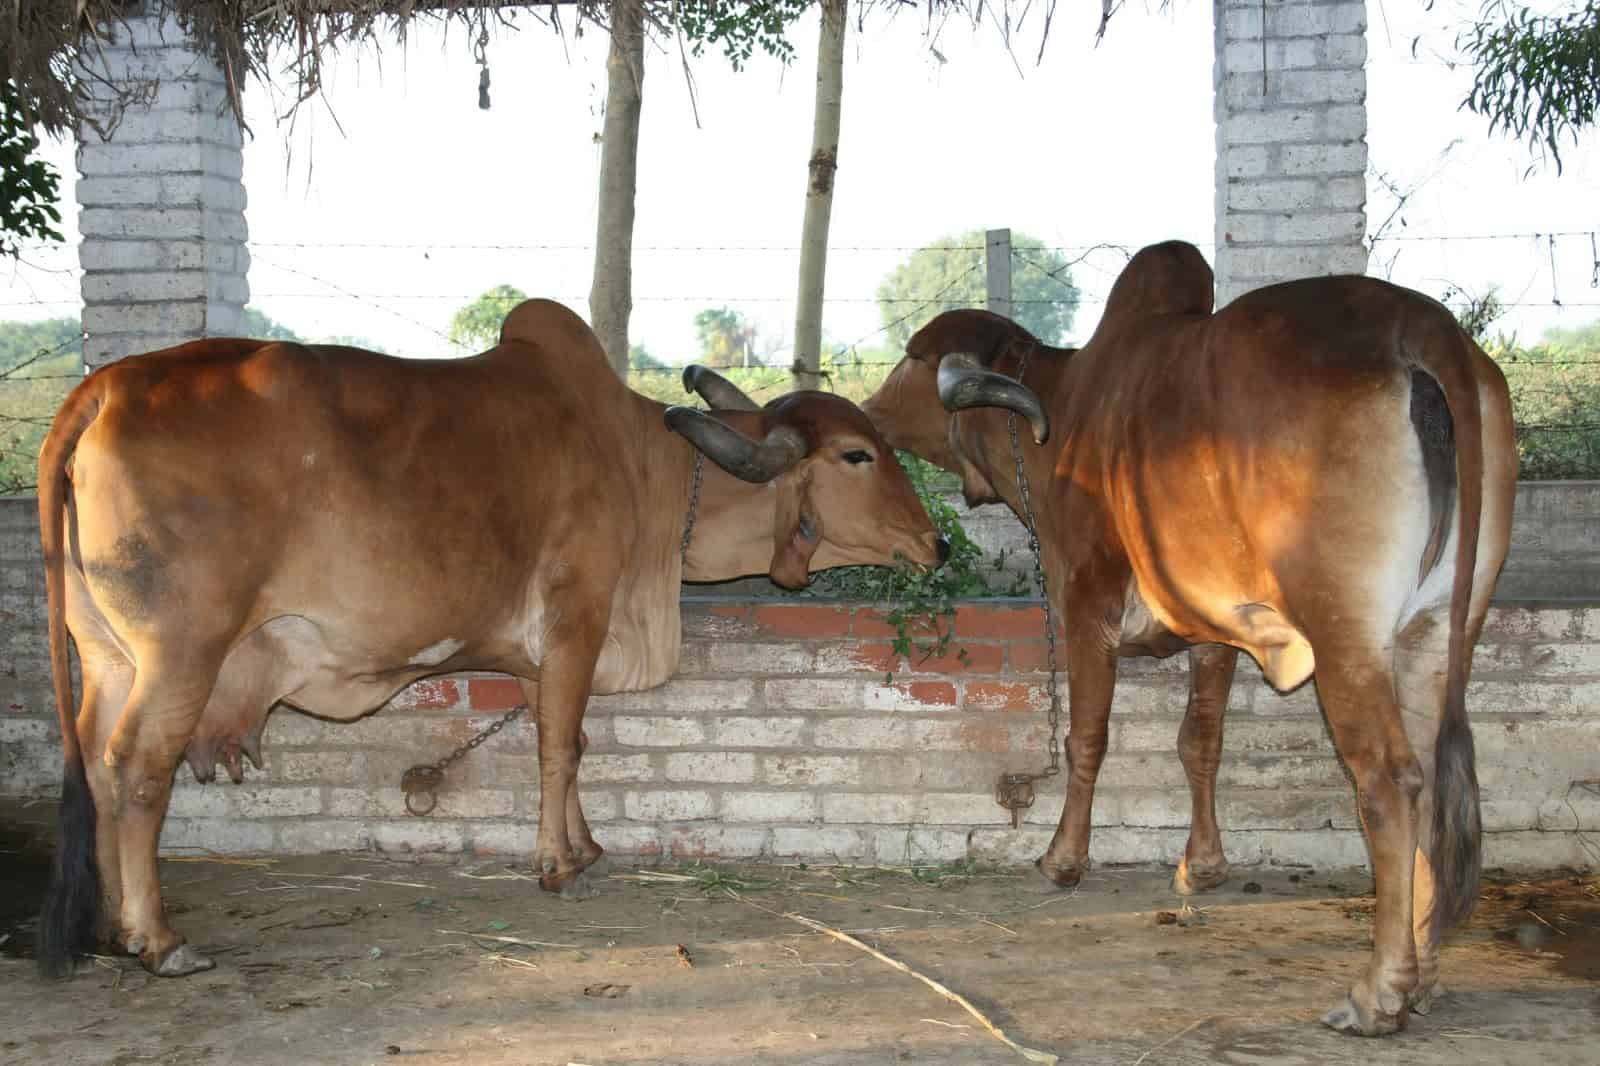 Cow Protection management